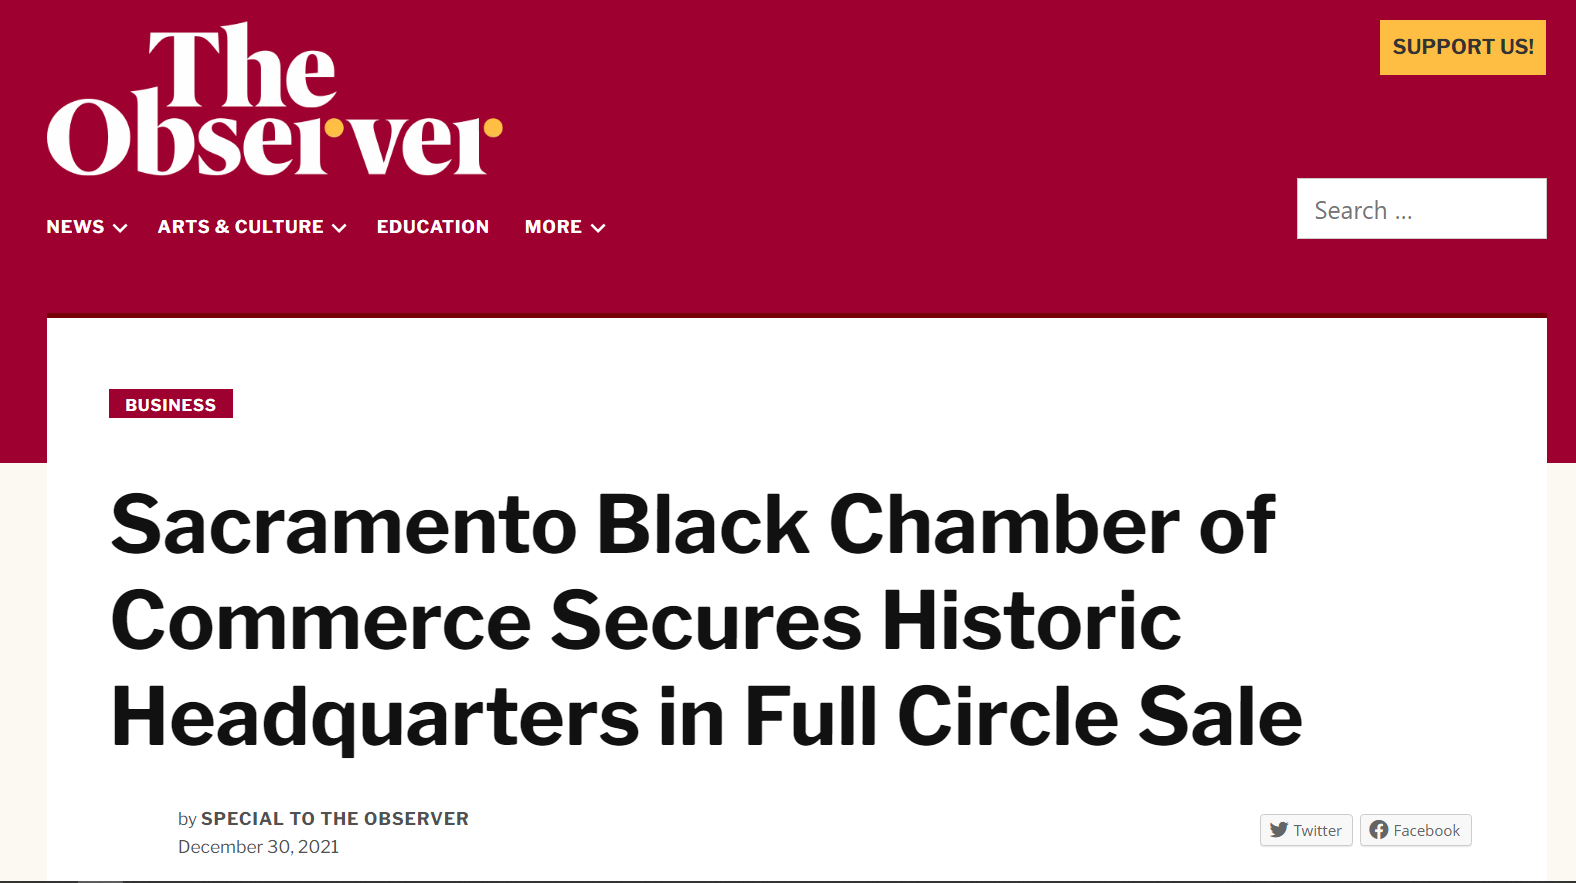 Sacramento Black Chamber of Commerce Secures Historic Headquarters in Full Circle Sale